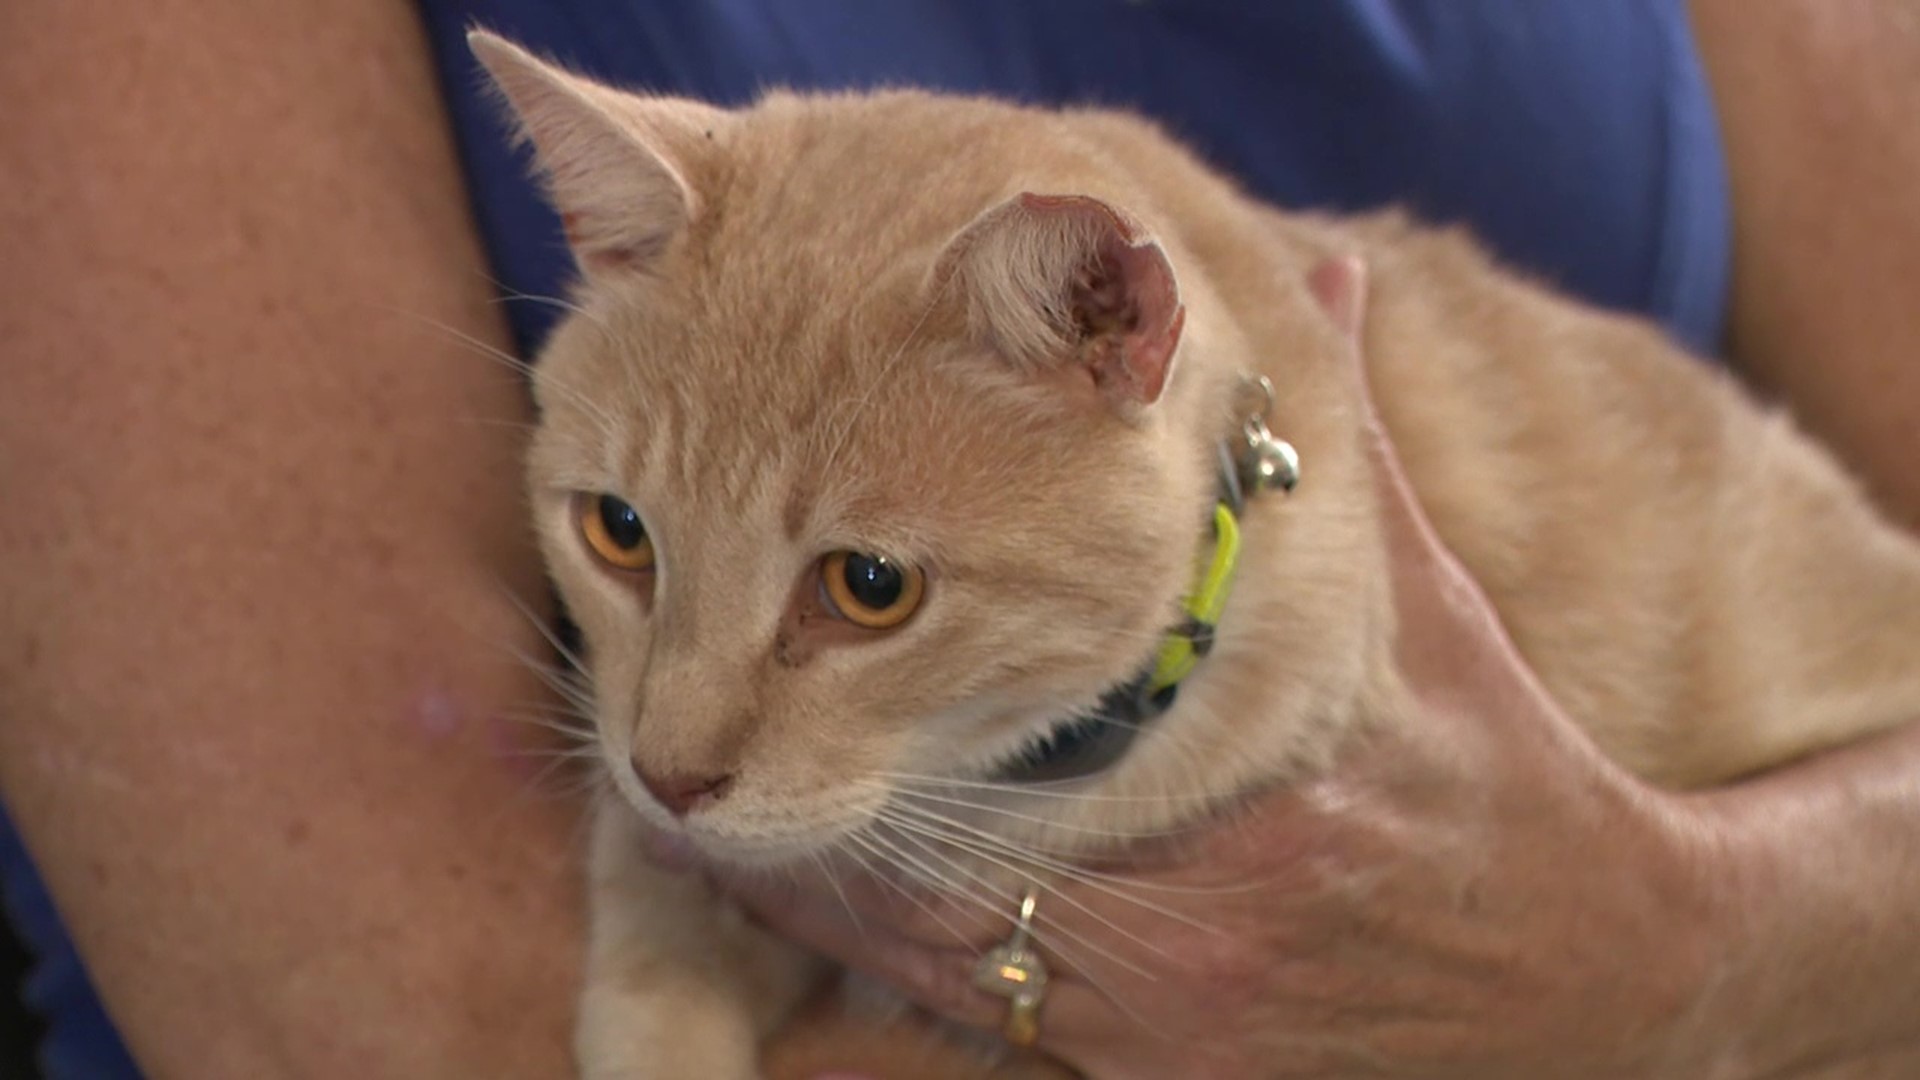 Squeaks was returned to the family after a vet discovered his microchip.